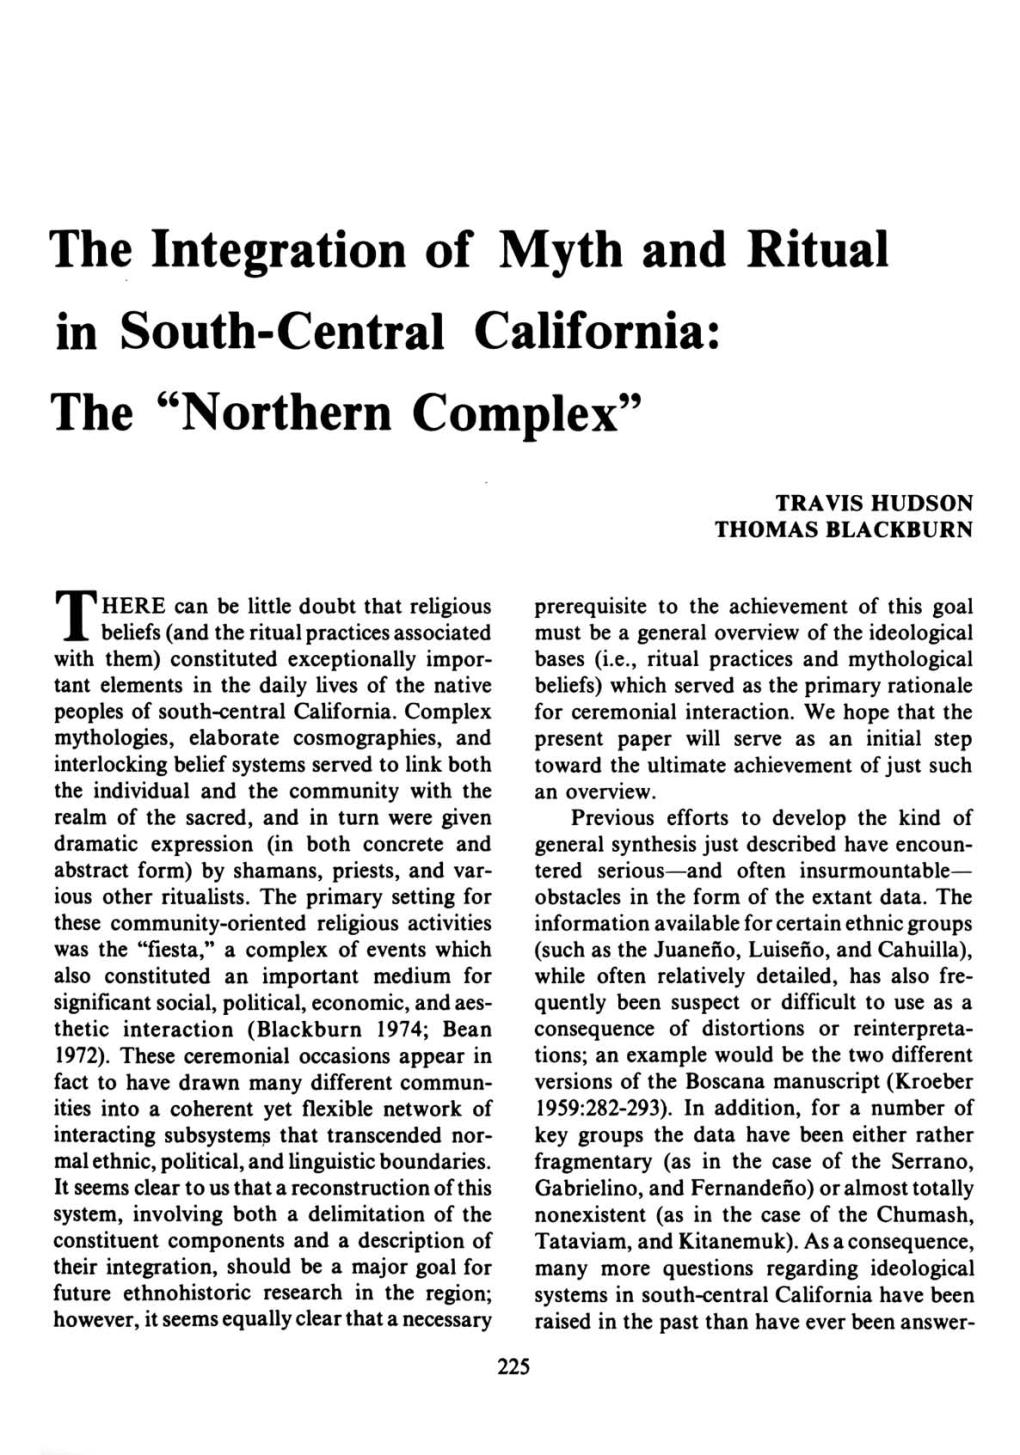 The Integration of Myth and Ritual in South-Central California: the "Northern Complex"